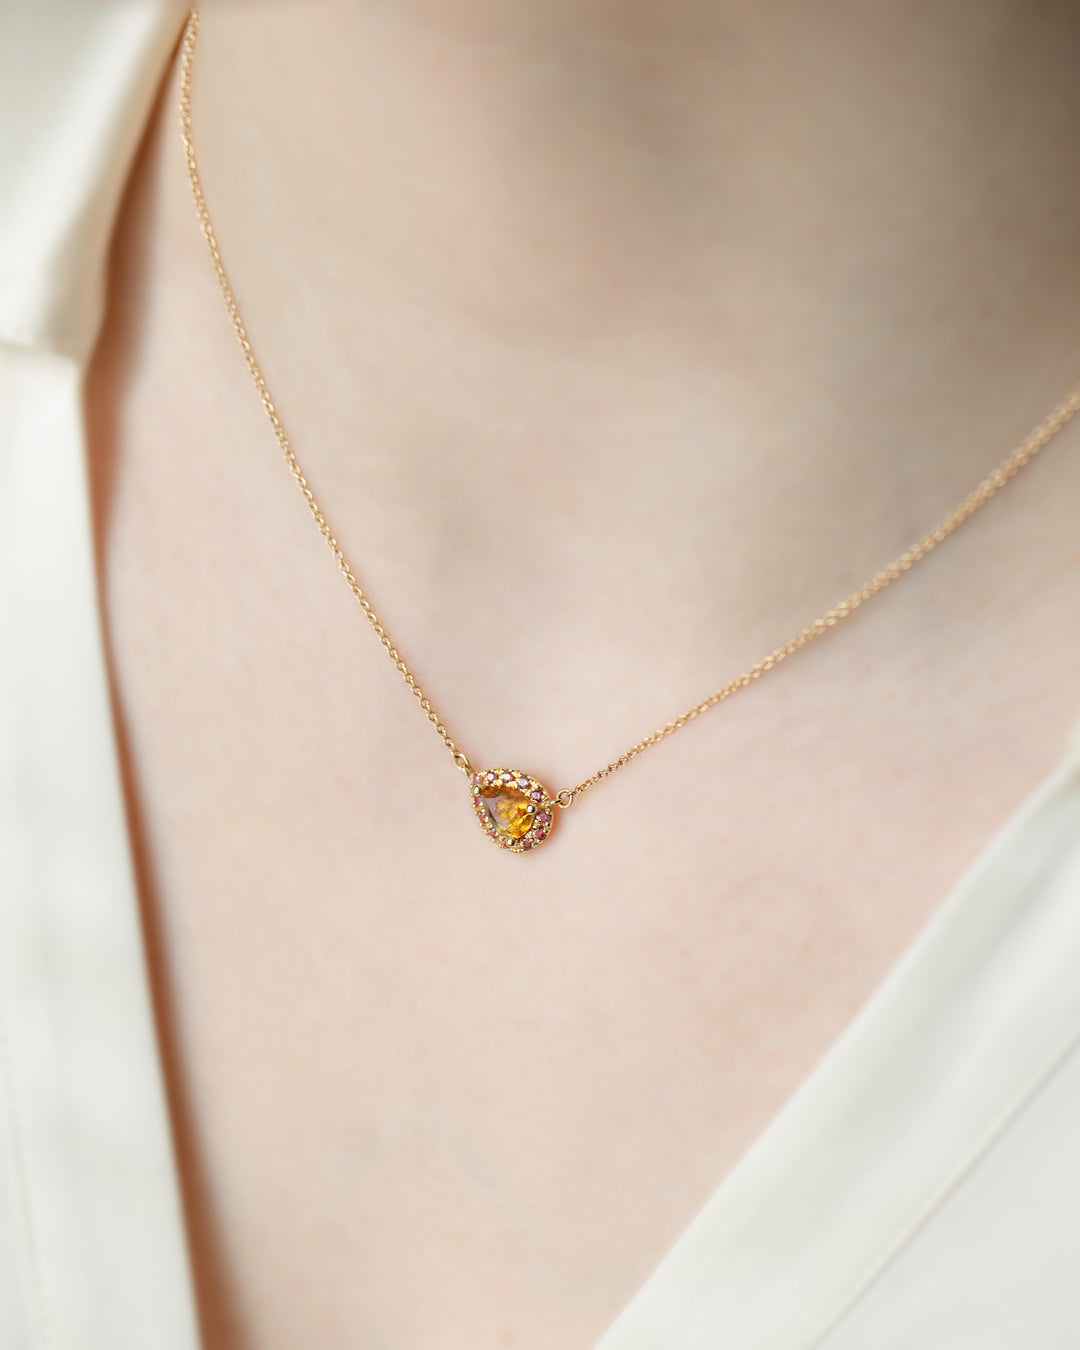 Orange Pear Shaped Montana And Padparadscha Sapphire Necklace Pendant 14K Gold